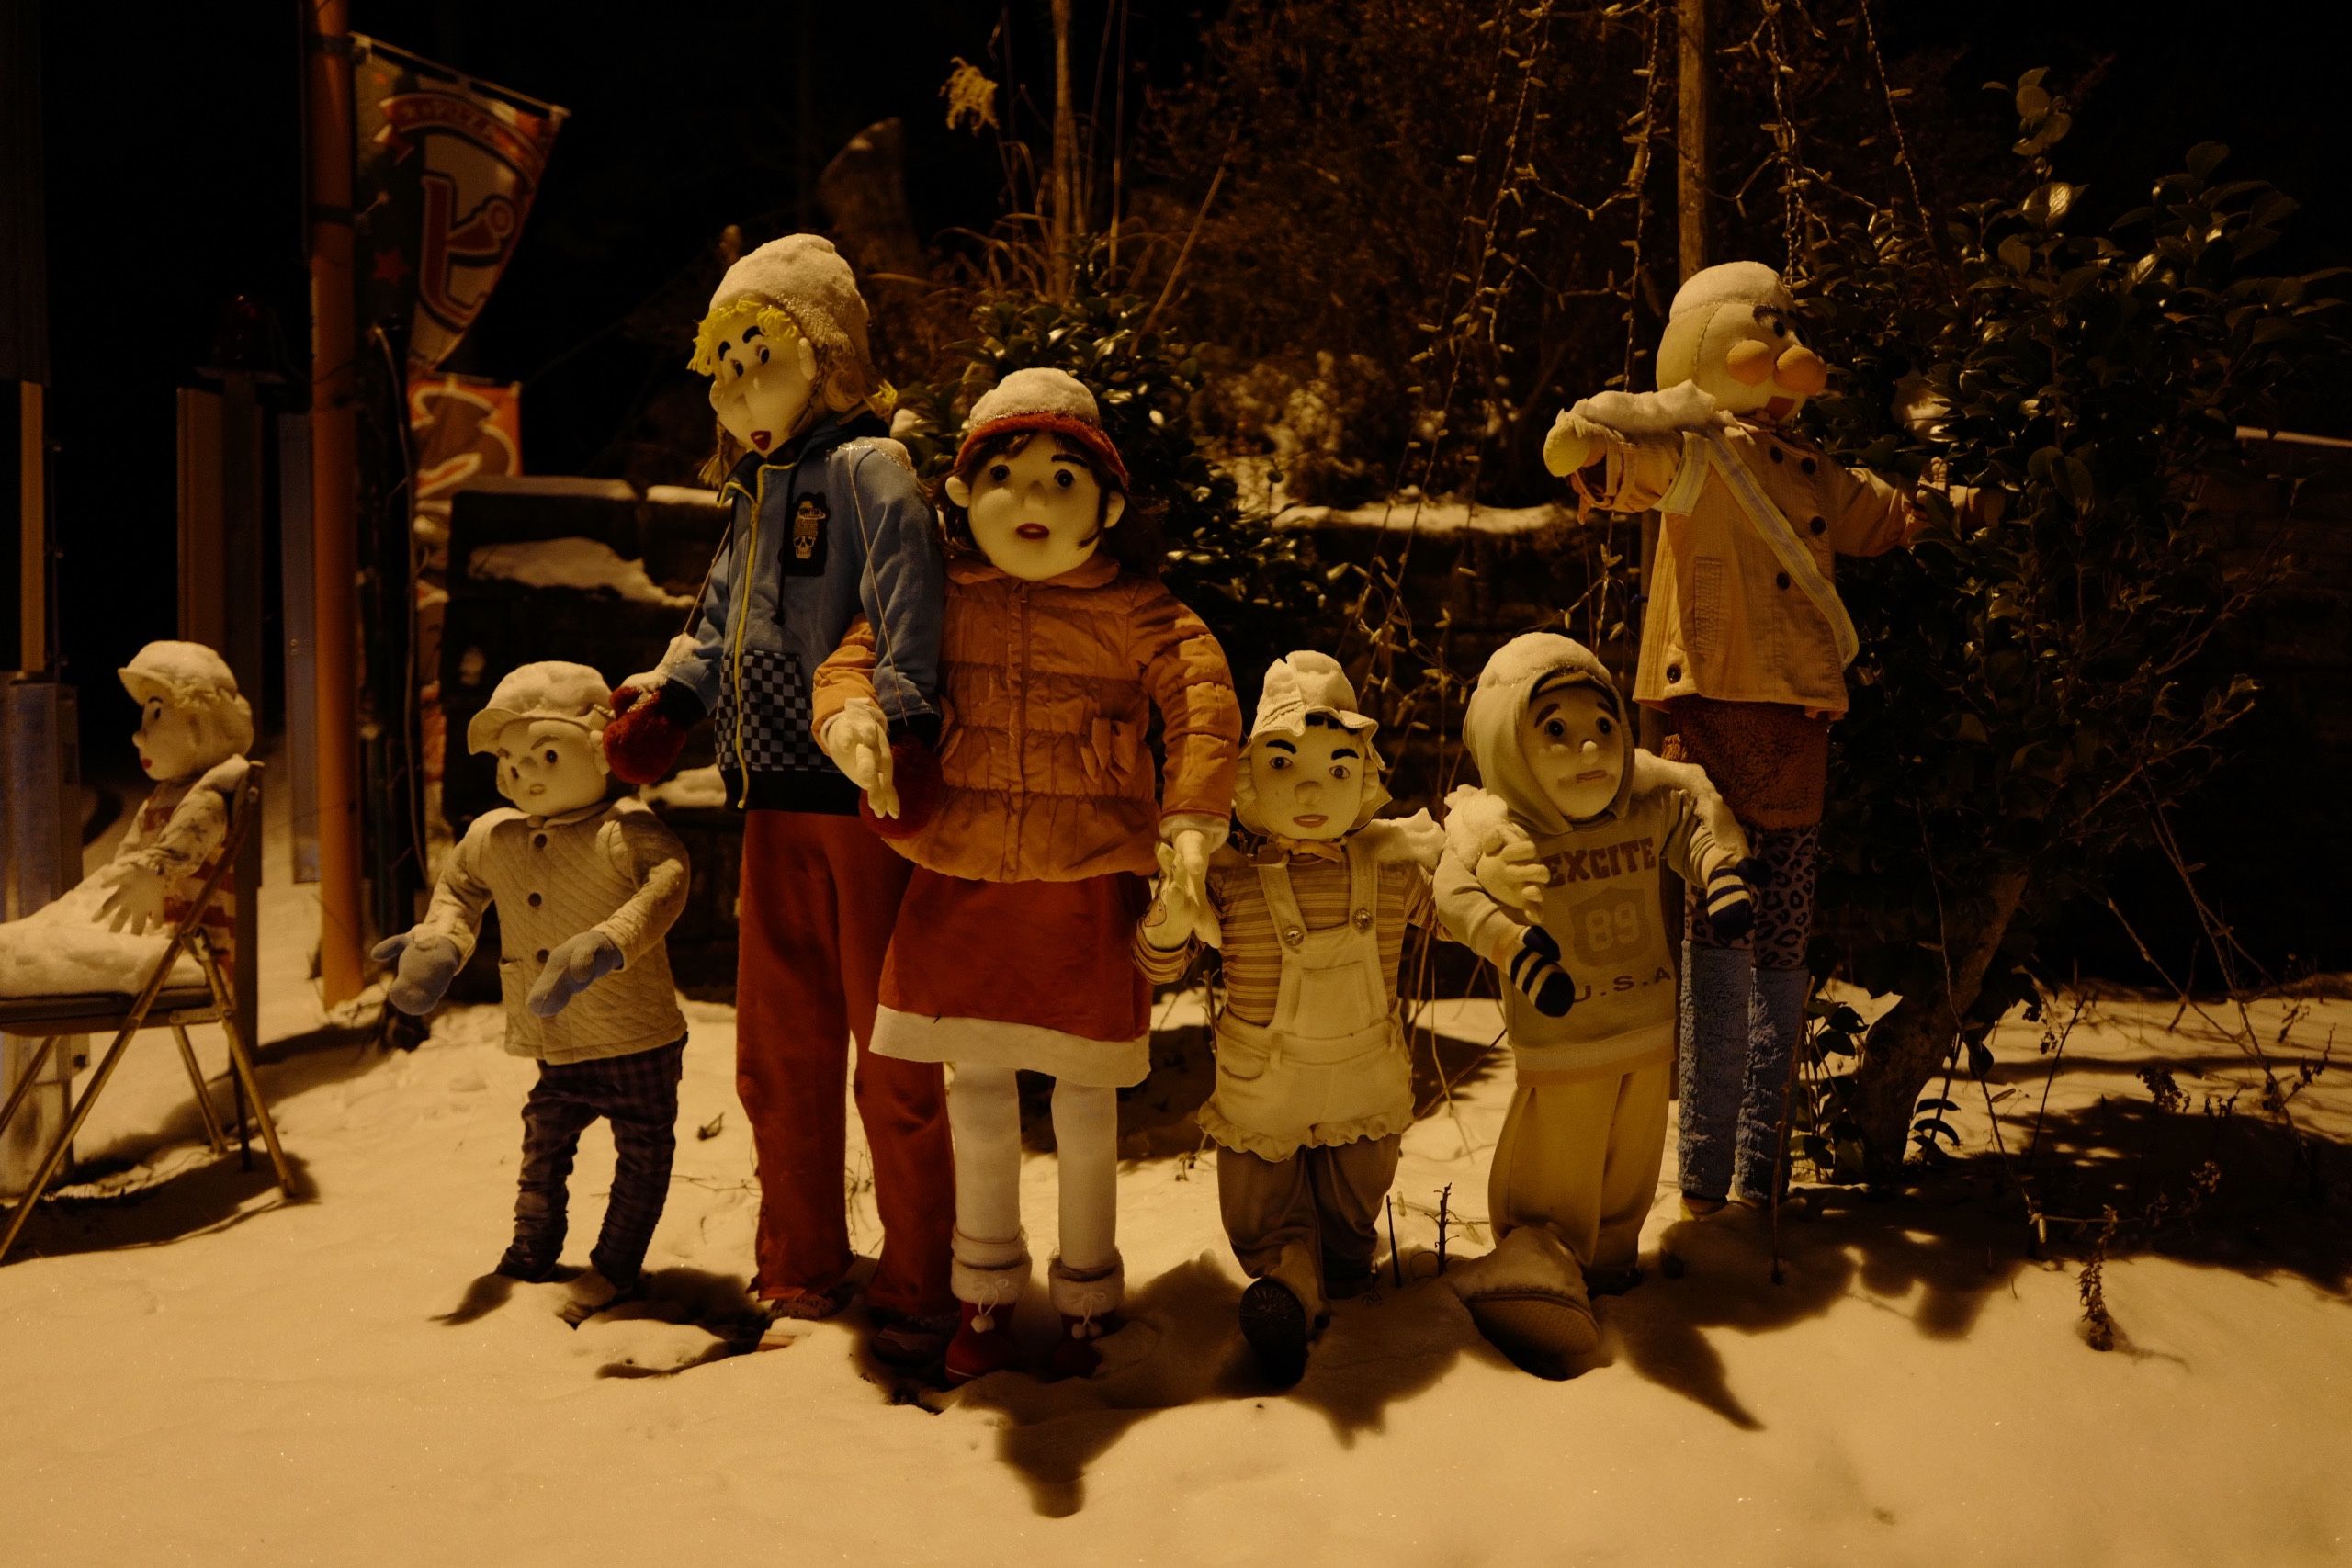 Another group of the dolls. Most of them are children, and they stand in the snow.